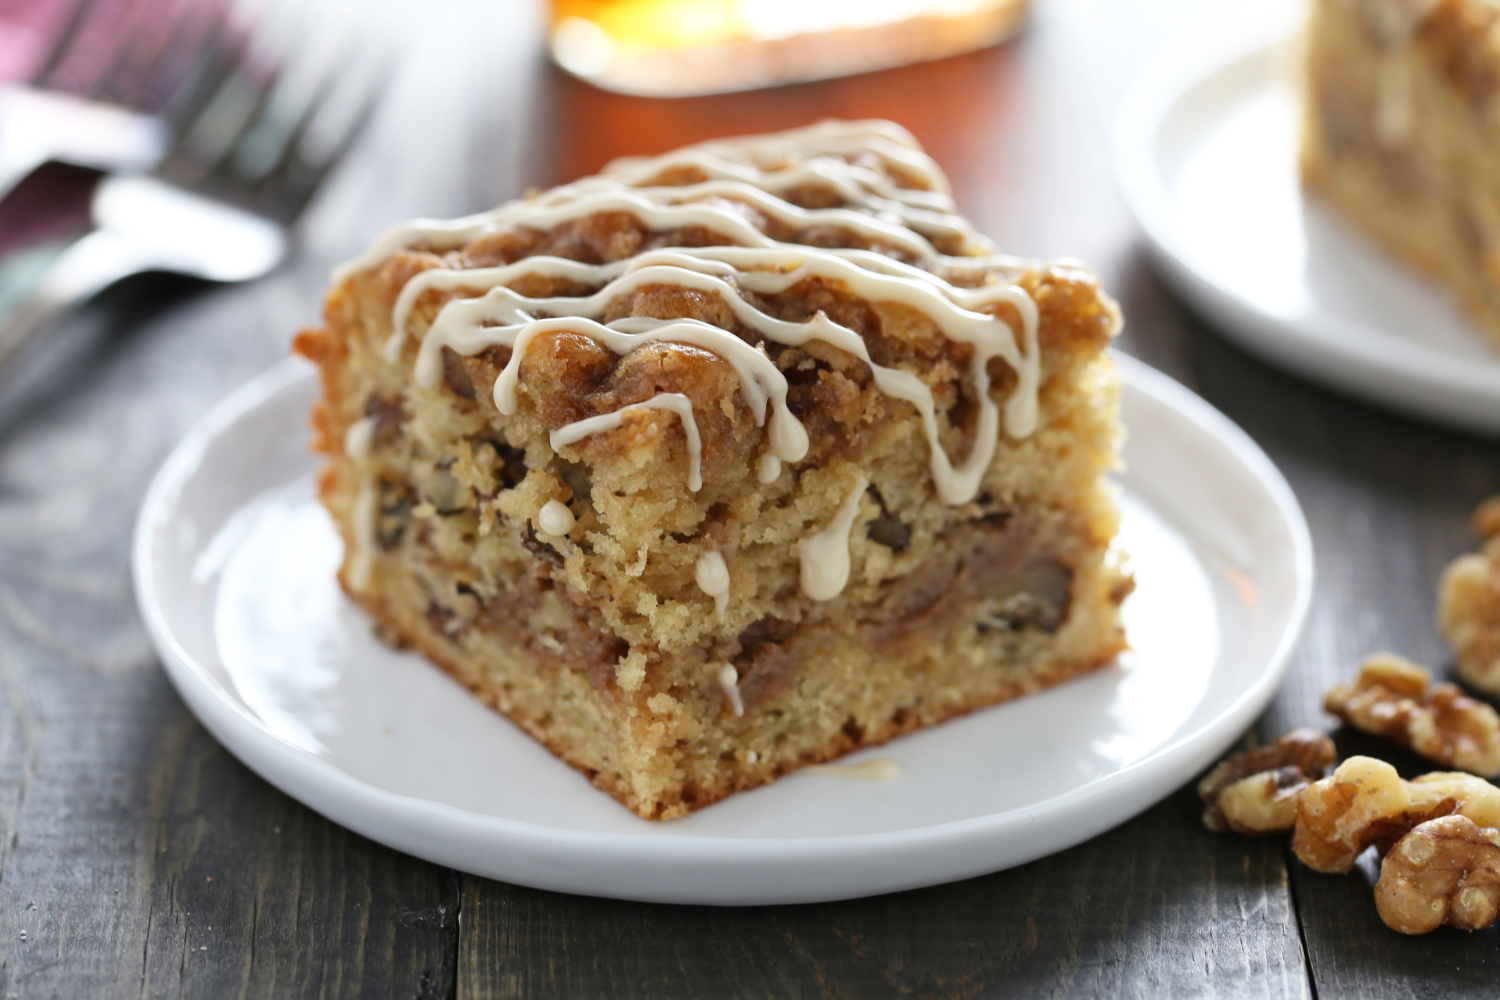 slice of maple coffee cake on a plate, surrounded by walnuts and drizzled with a simple maple icing